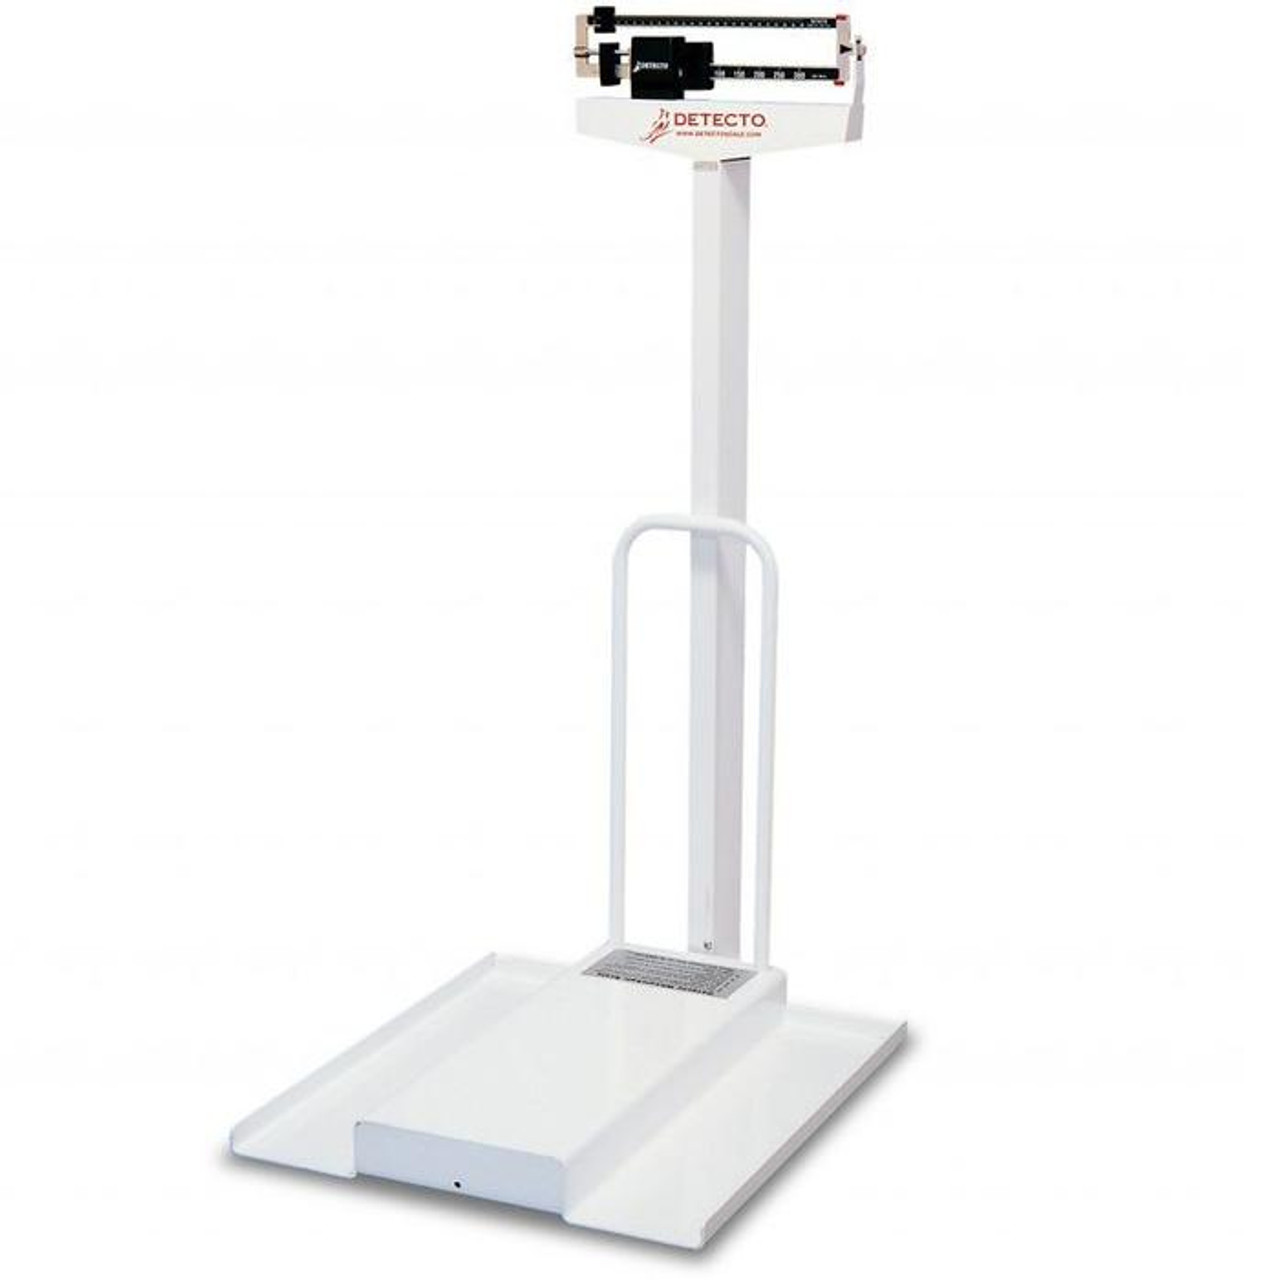 https://store.cevimed.com/images/stencil/1280x1280/products/123026/127433/Detecto_Stationary_Mechanical_Wheelchair_Scale_with_Ramp_Model_485_-_Imperial__86453__80231.1633715567.jpg?c=1